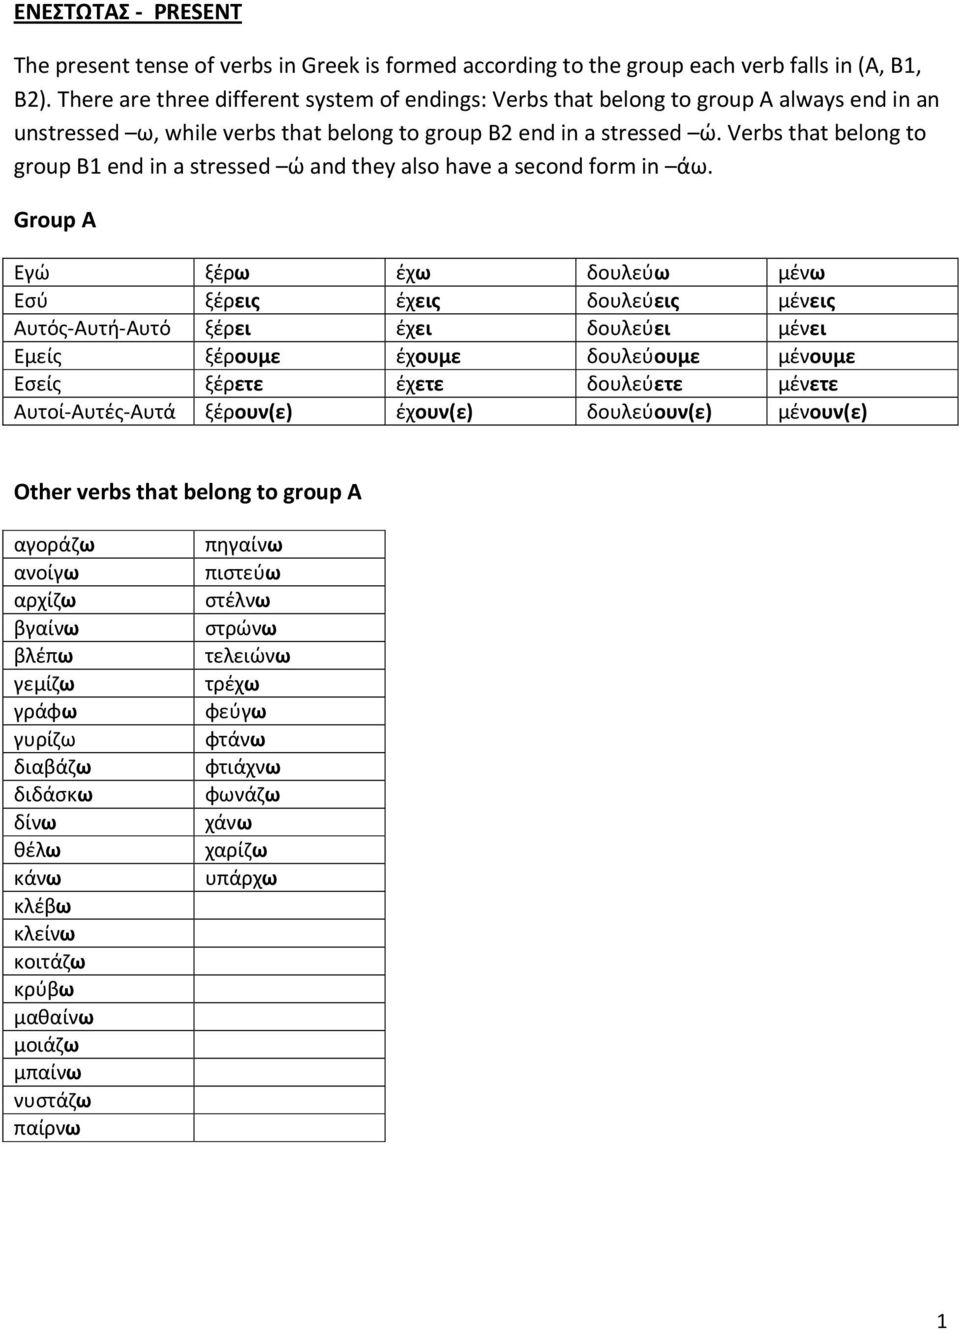 Verbs that belong to group Β1 end in a stressed ώ and they also have a second form in άω.